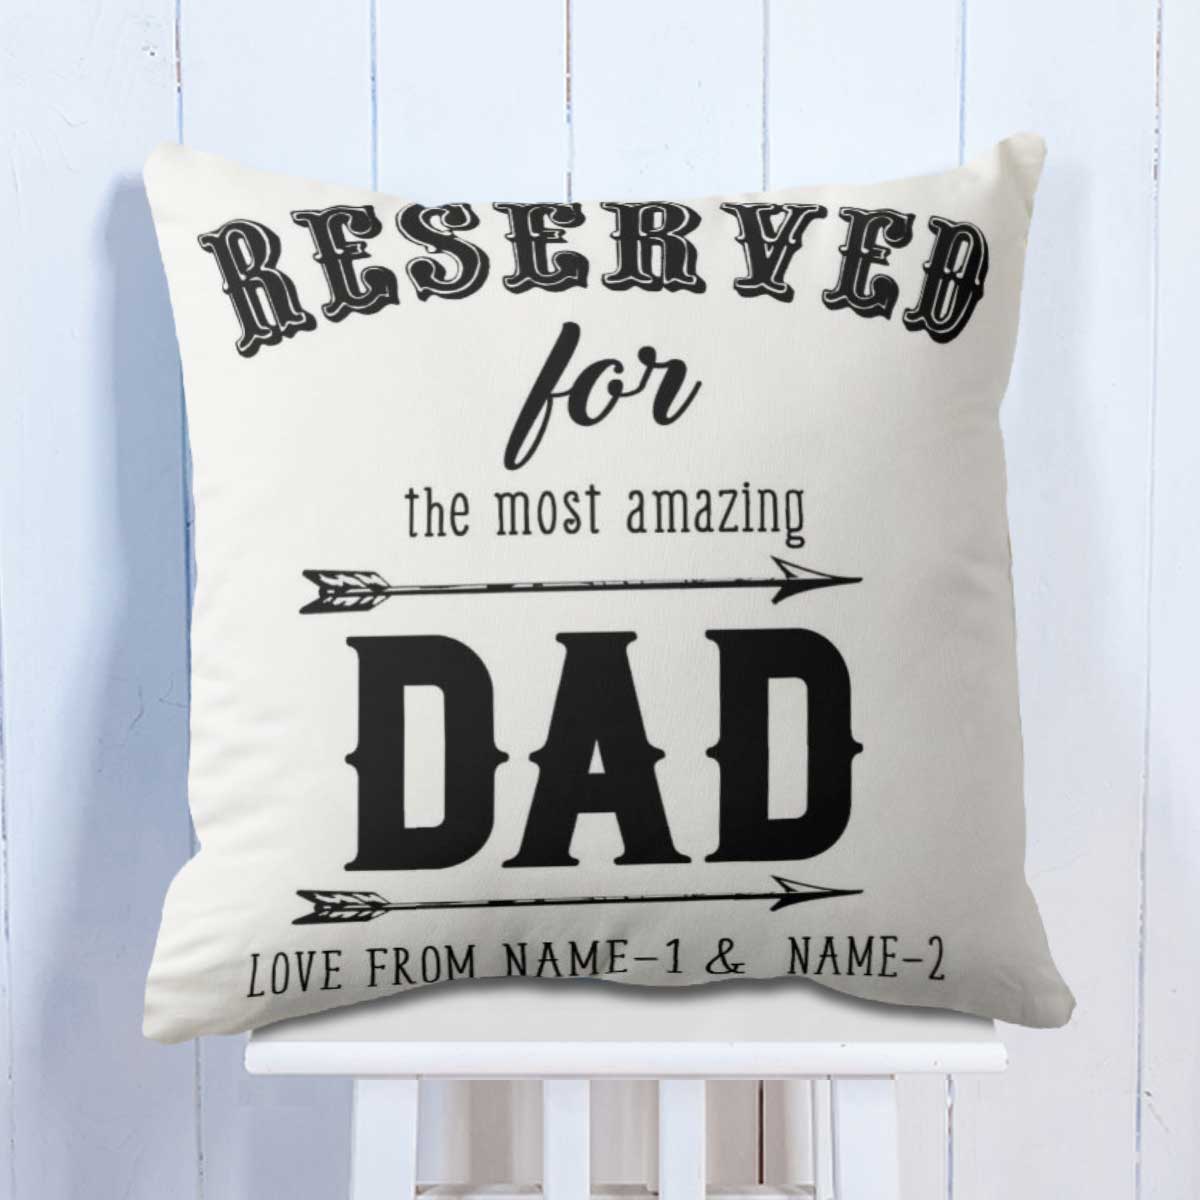 Gifts for Dad Fathers Day Wooden Clock Gifts, Dad Birthday Gift from  Daughter So | eBay